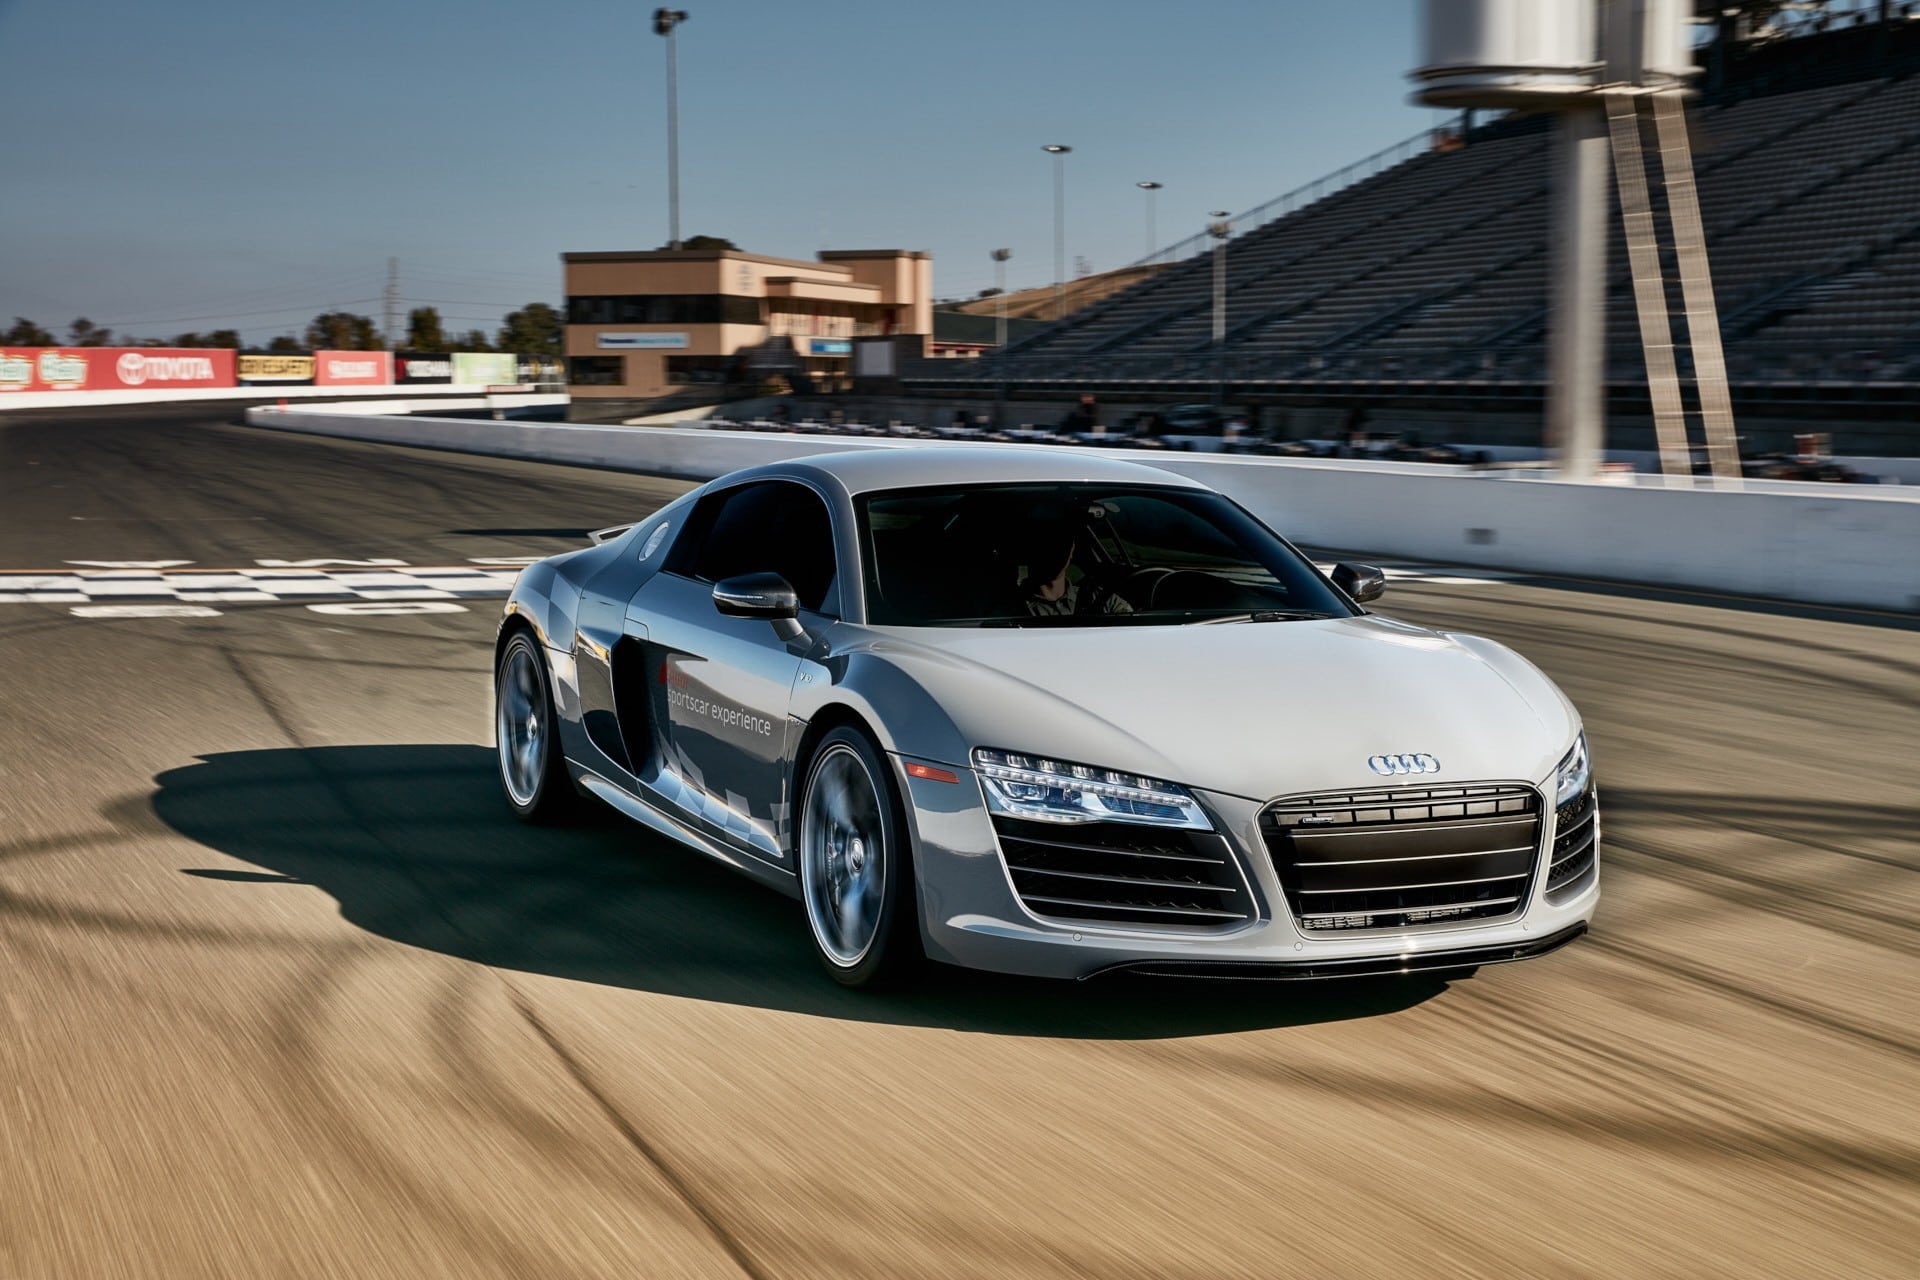 The limited edition Audi R8 V10 +, now available at Audi sportscar experience, sonoma